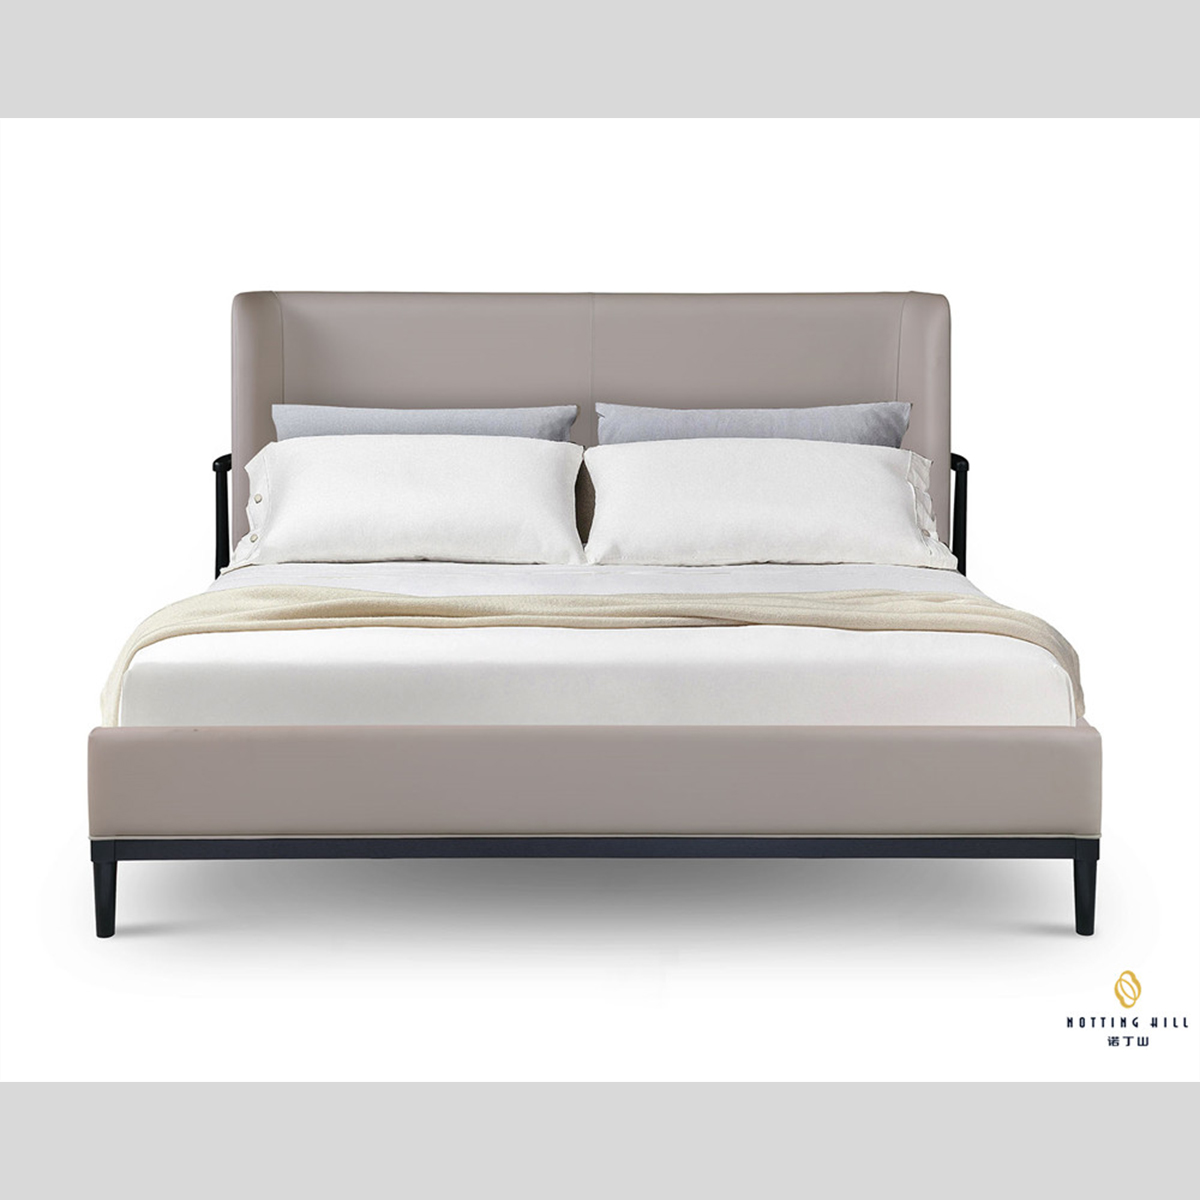 Elegant Contemporary Double Bed